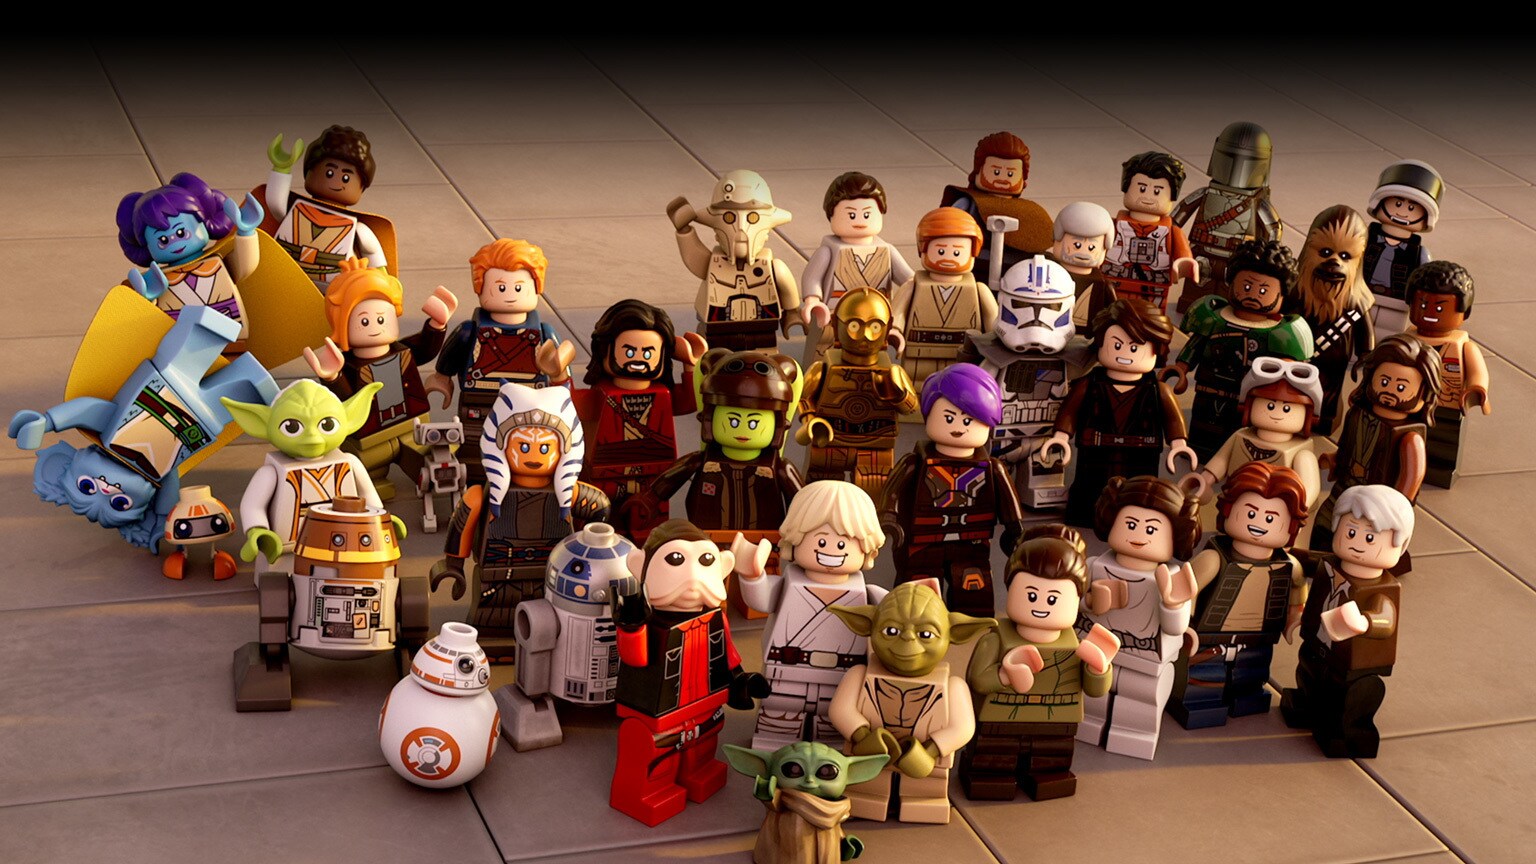 LEGO Star Wars Celebrates 25 Years with Charming New Short